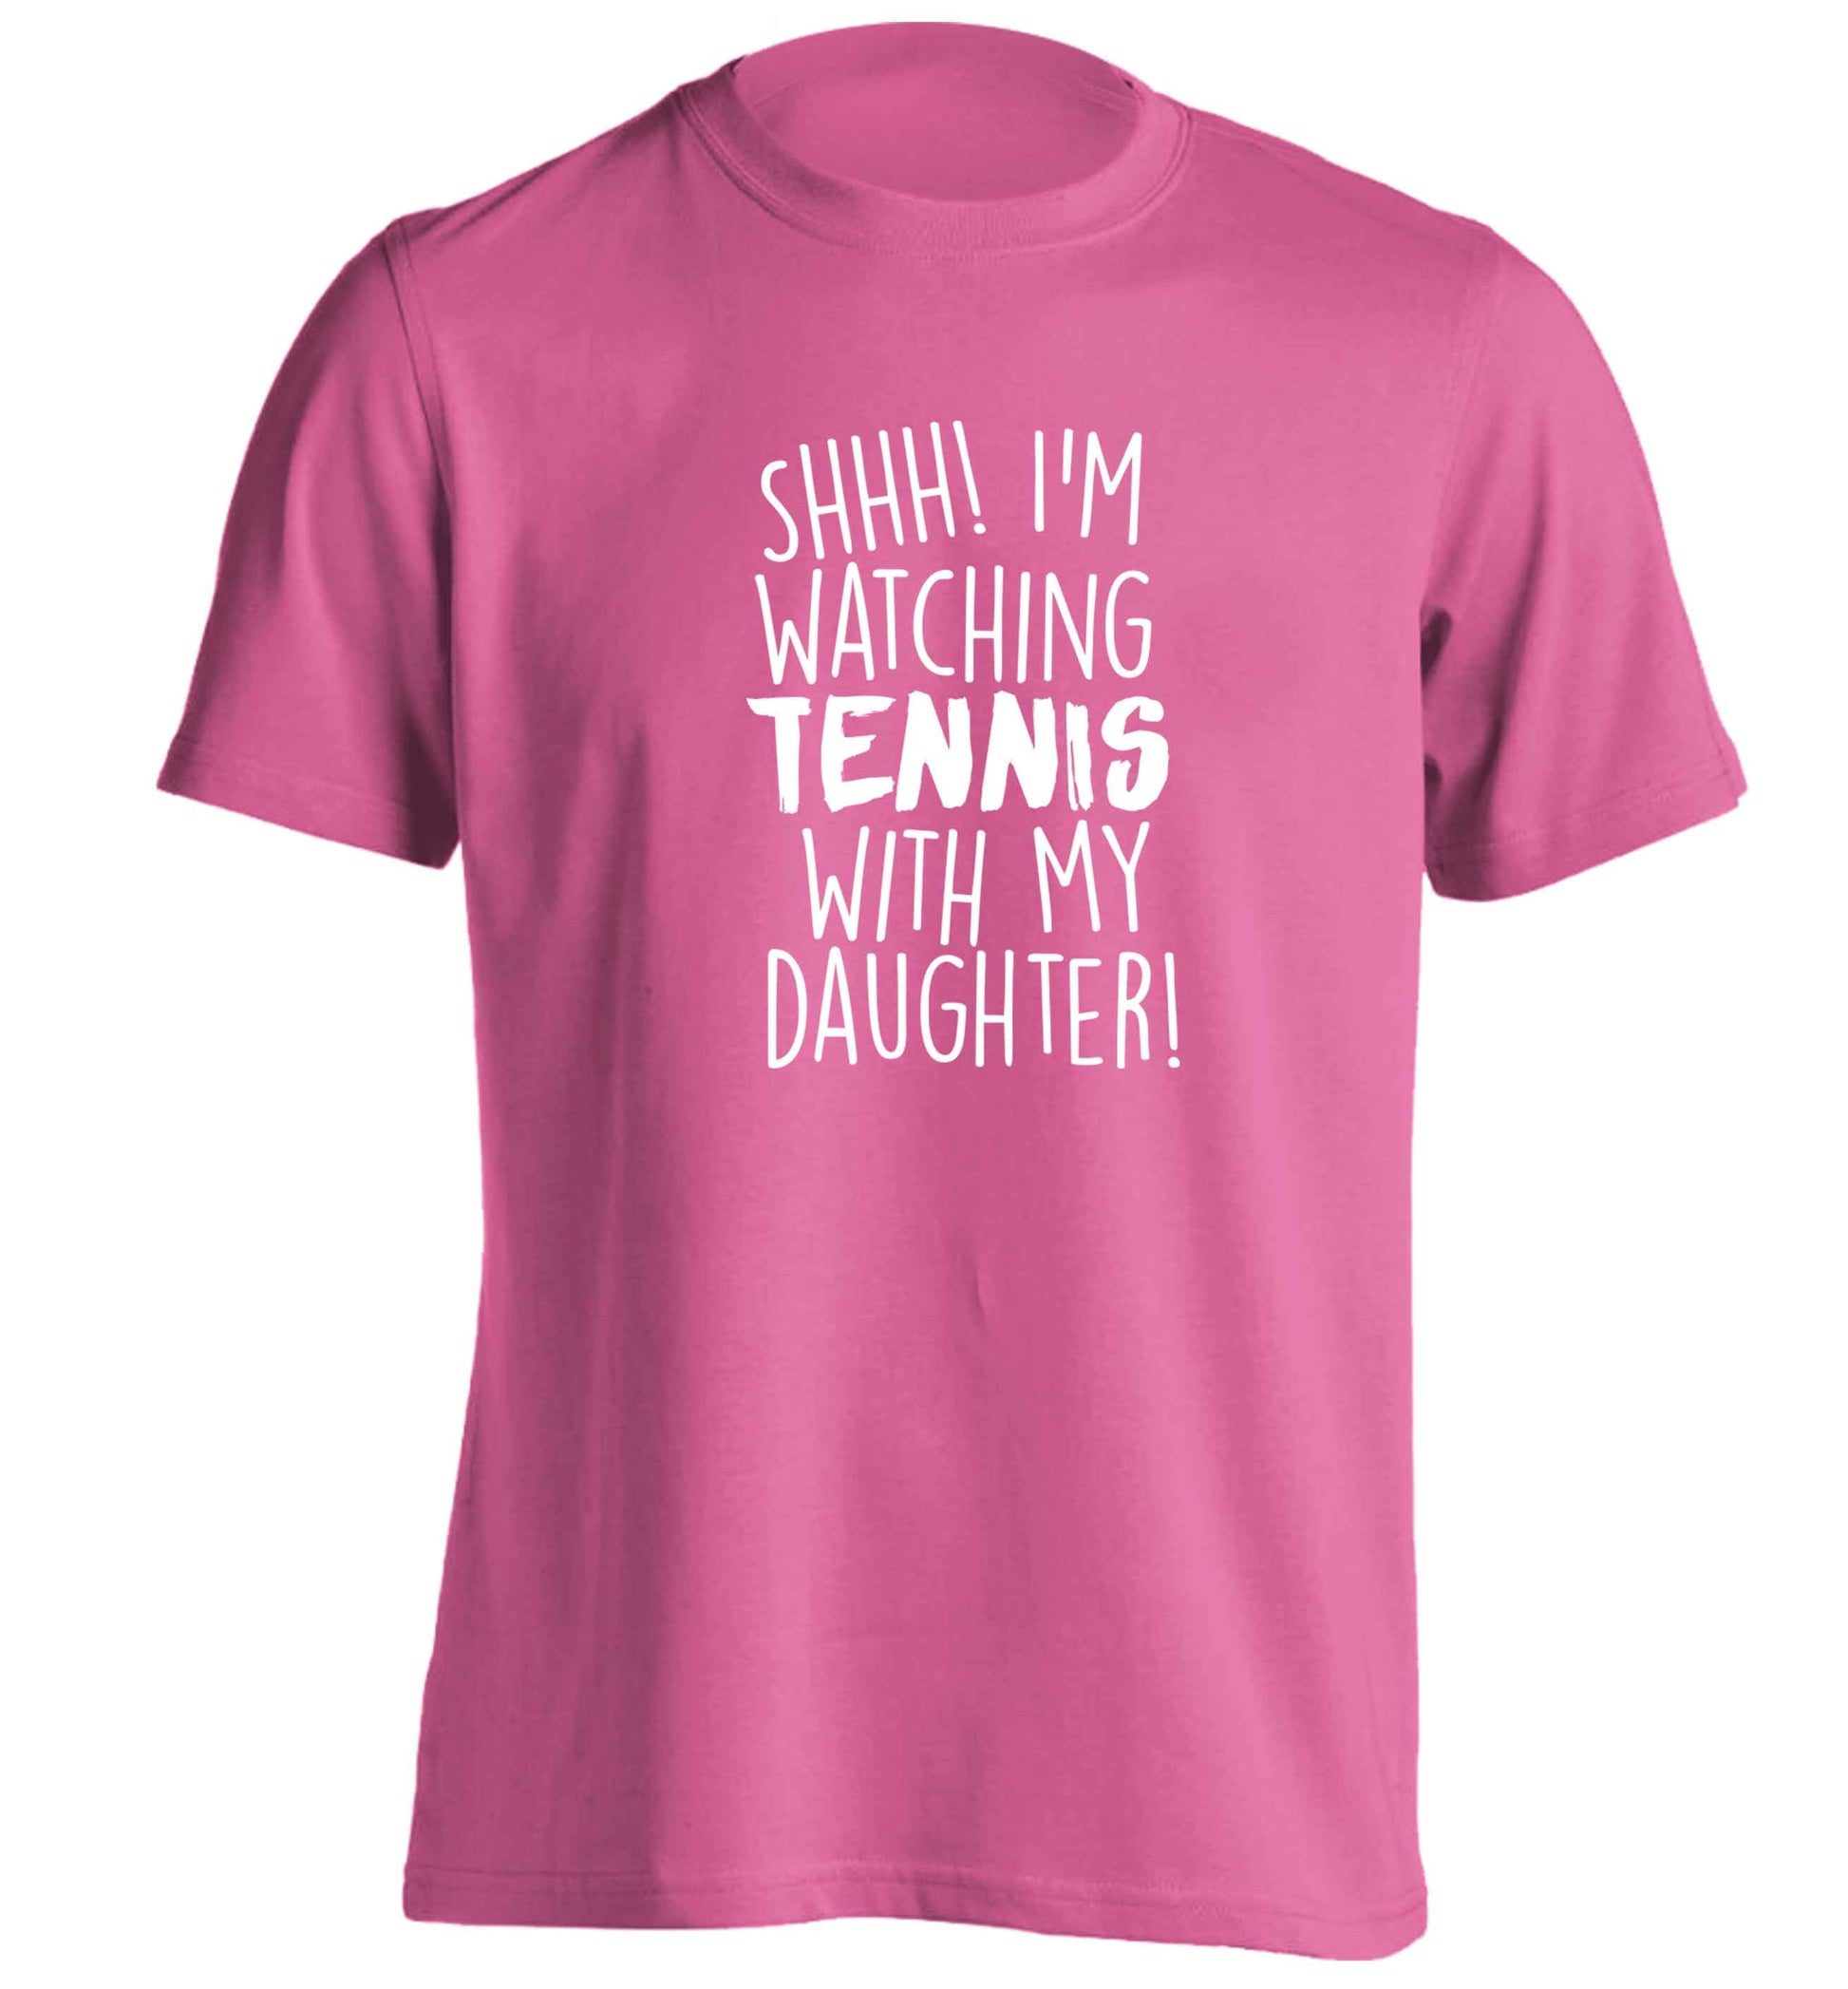 Shh! I'm watching tennis with my daughter! adults unisex pink Tshirt 2XL